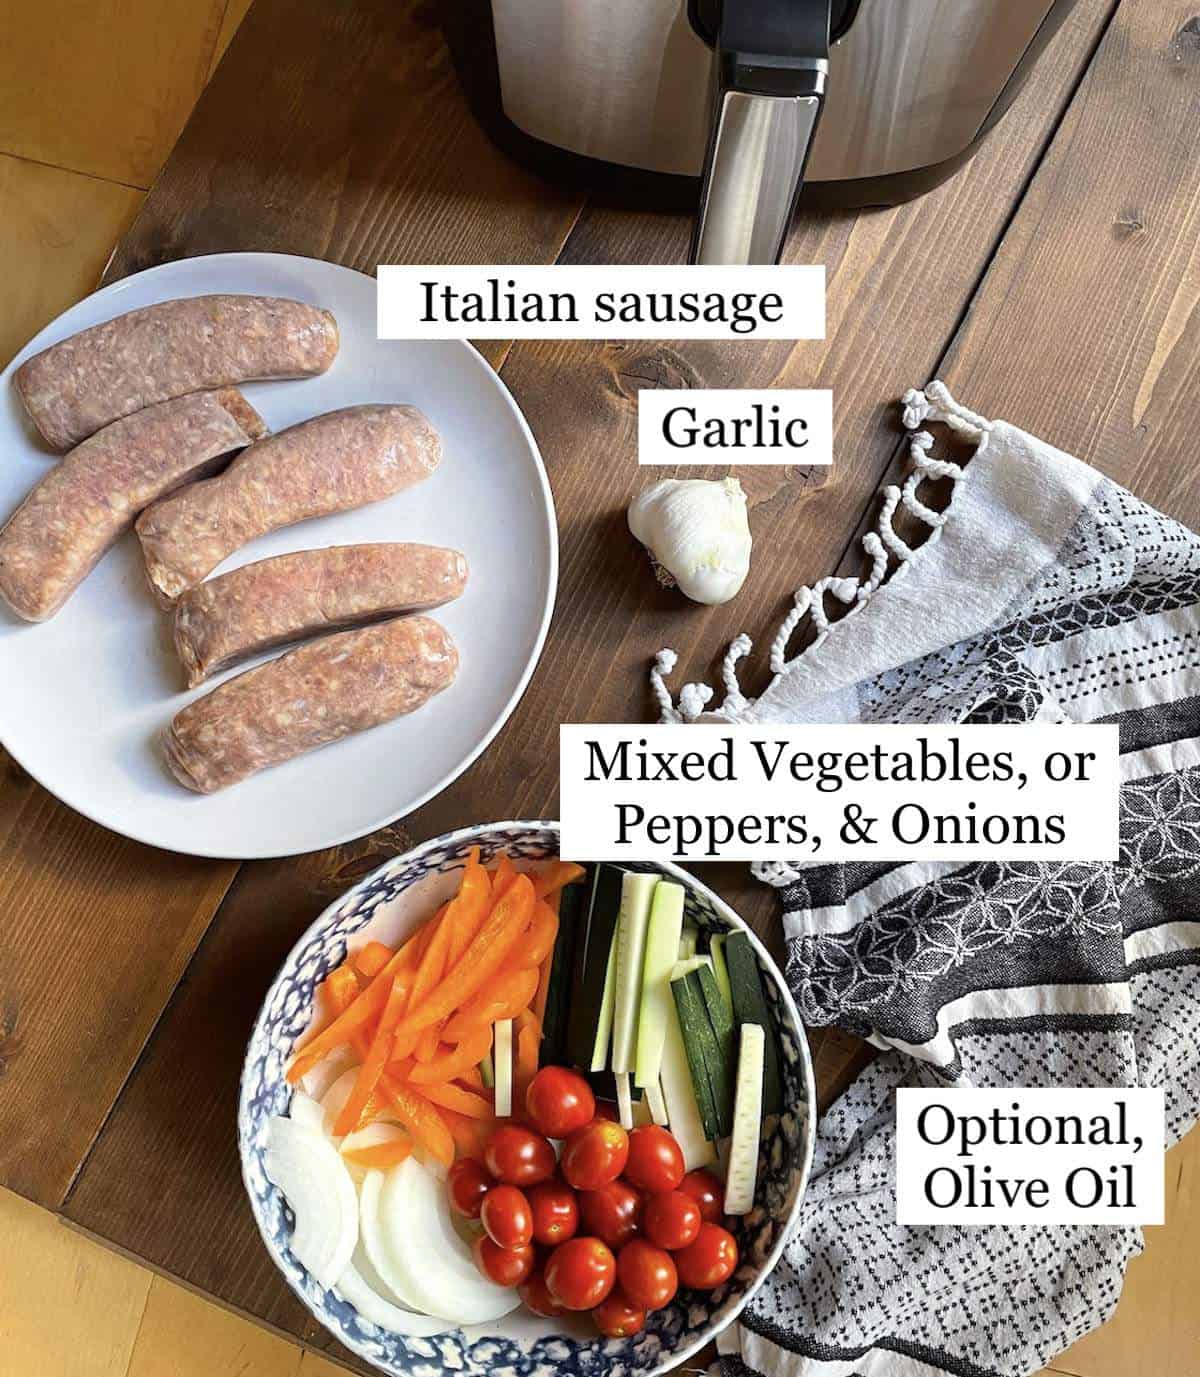 The ingredients in air fryer Italian sausage and peppers laid out and labeled.